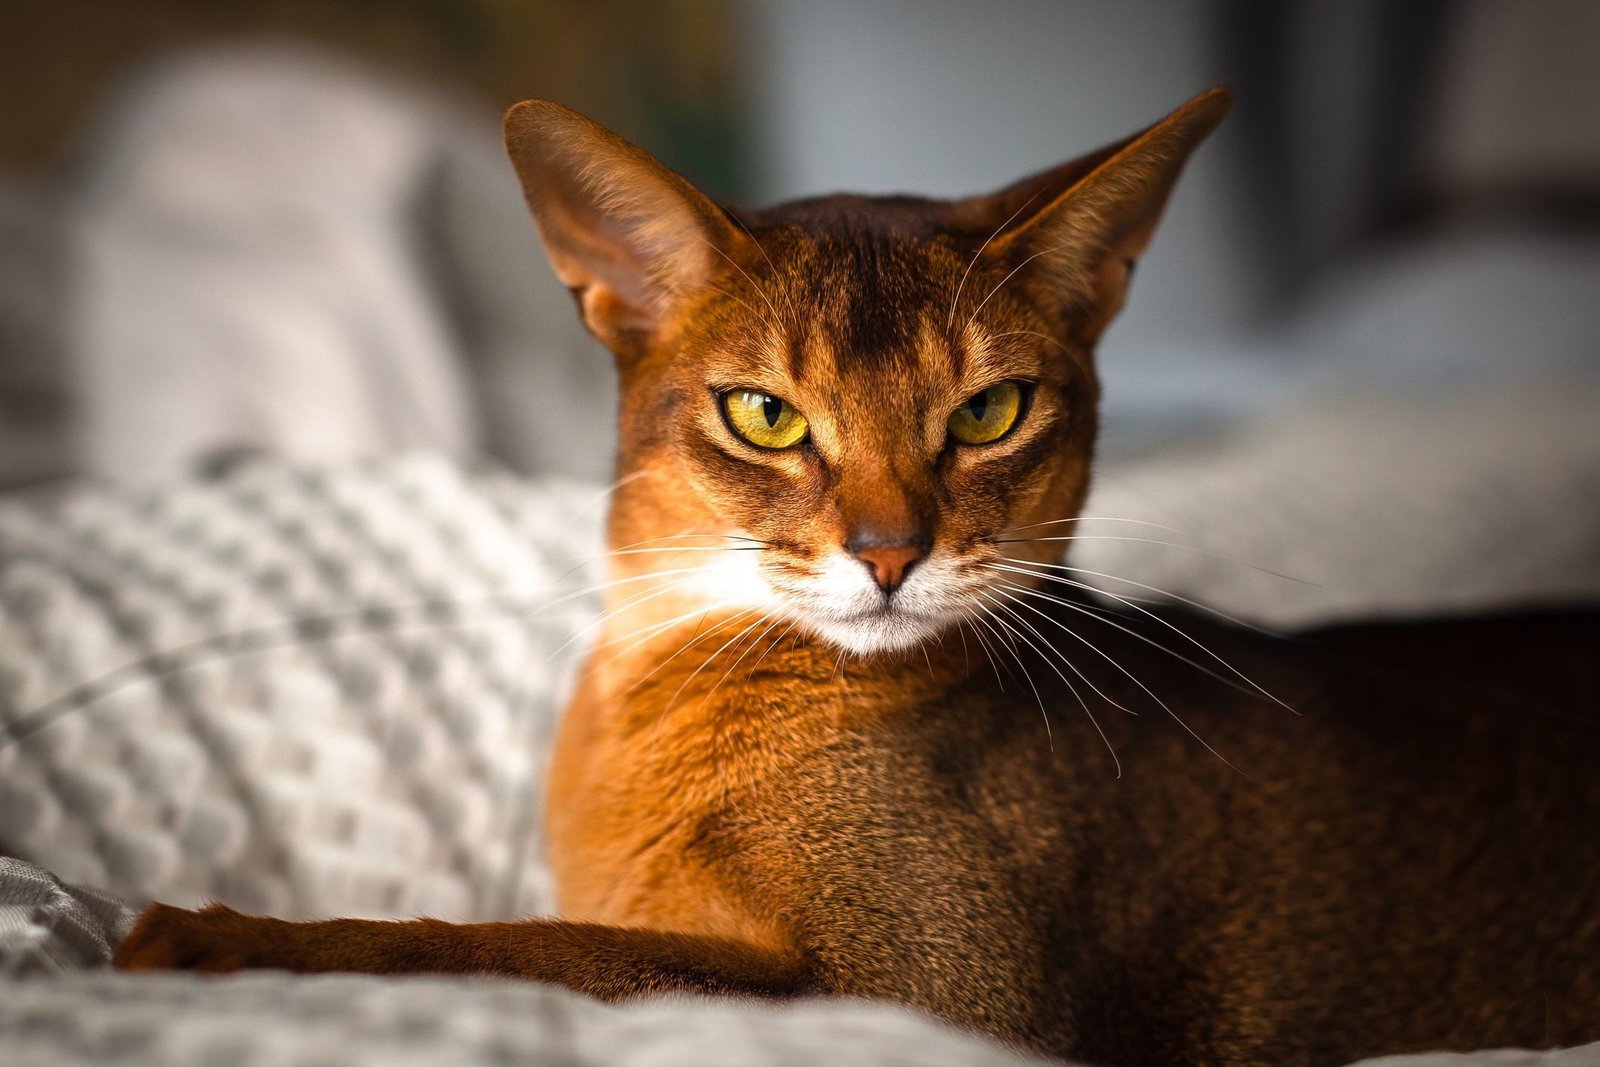 Abyssinian is ơne of The 12 Most Popular Cat Breeds